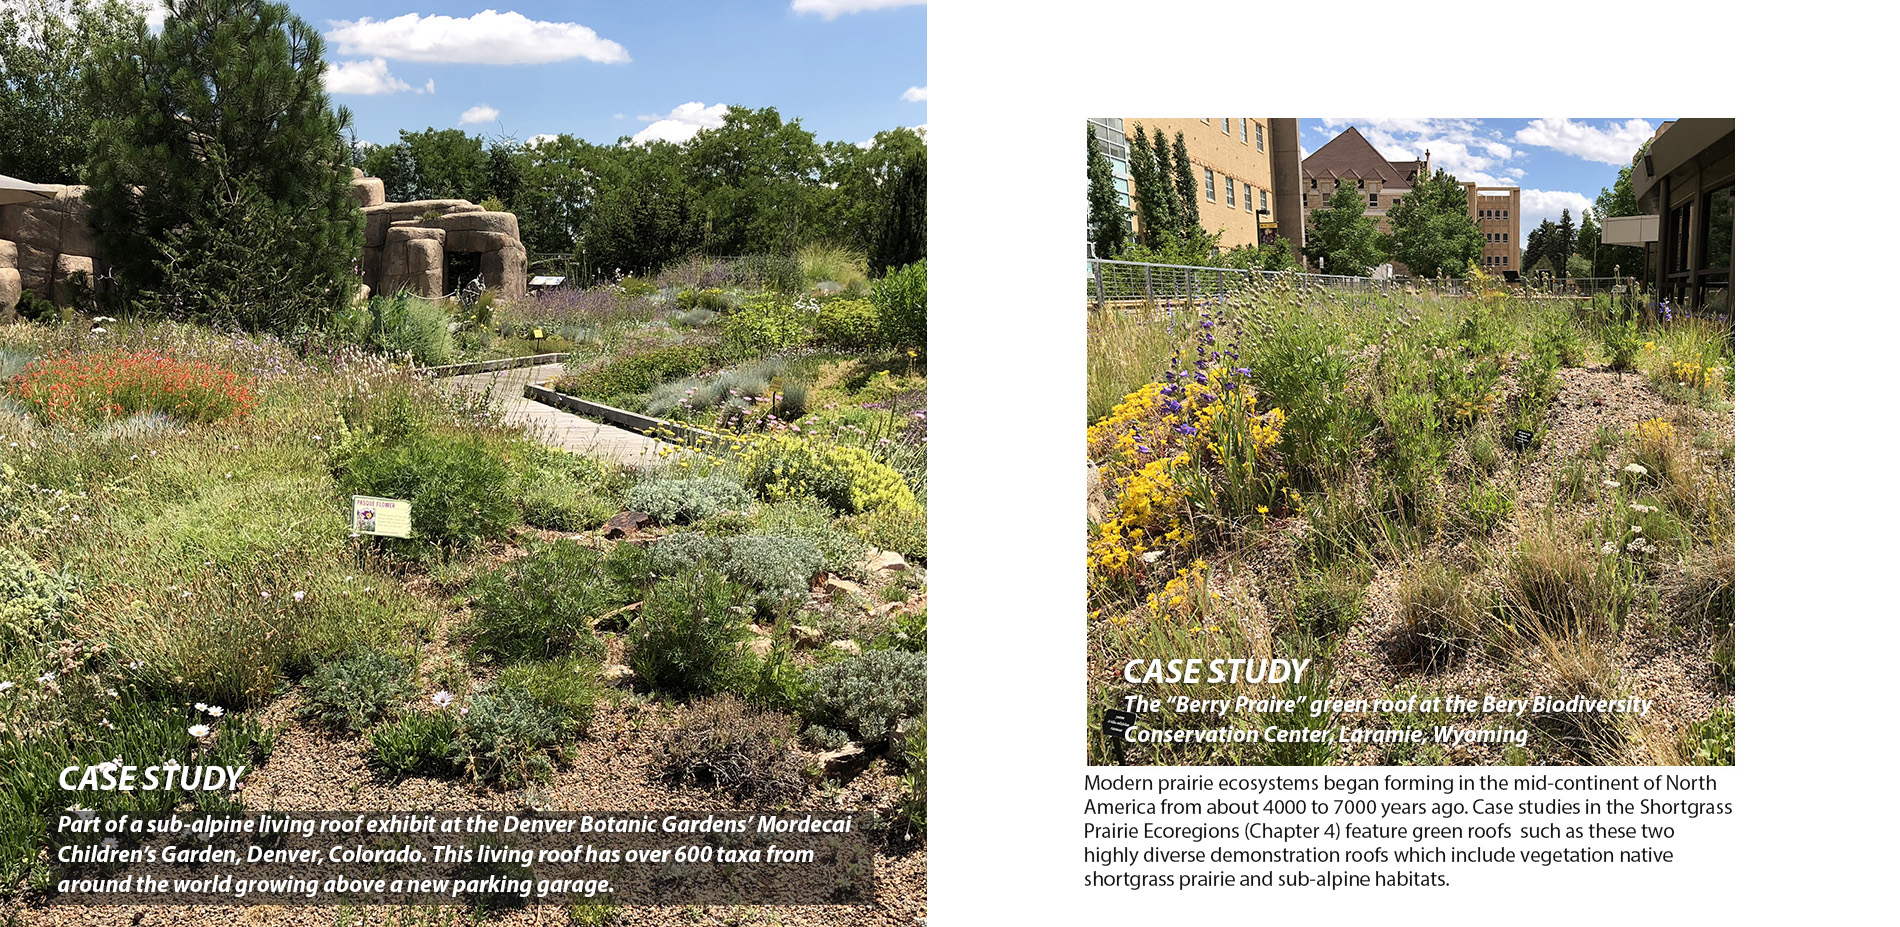 Green Roofs along the Front Range of the Rocky Mountains (Chapter 4)